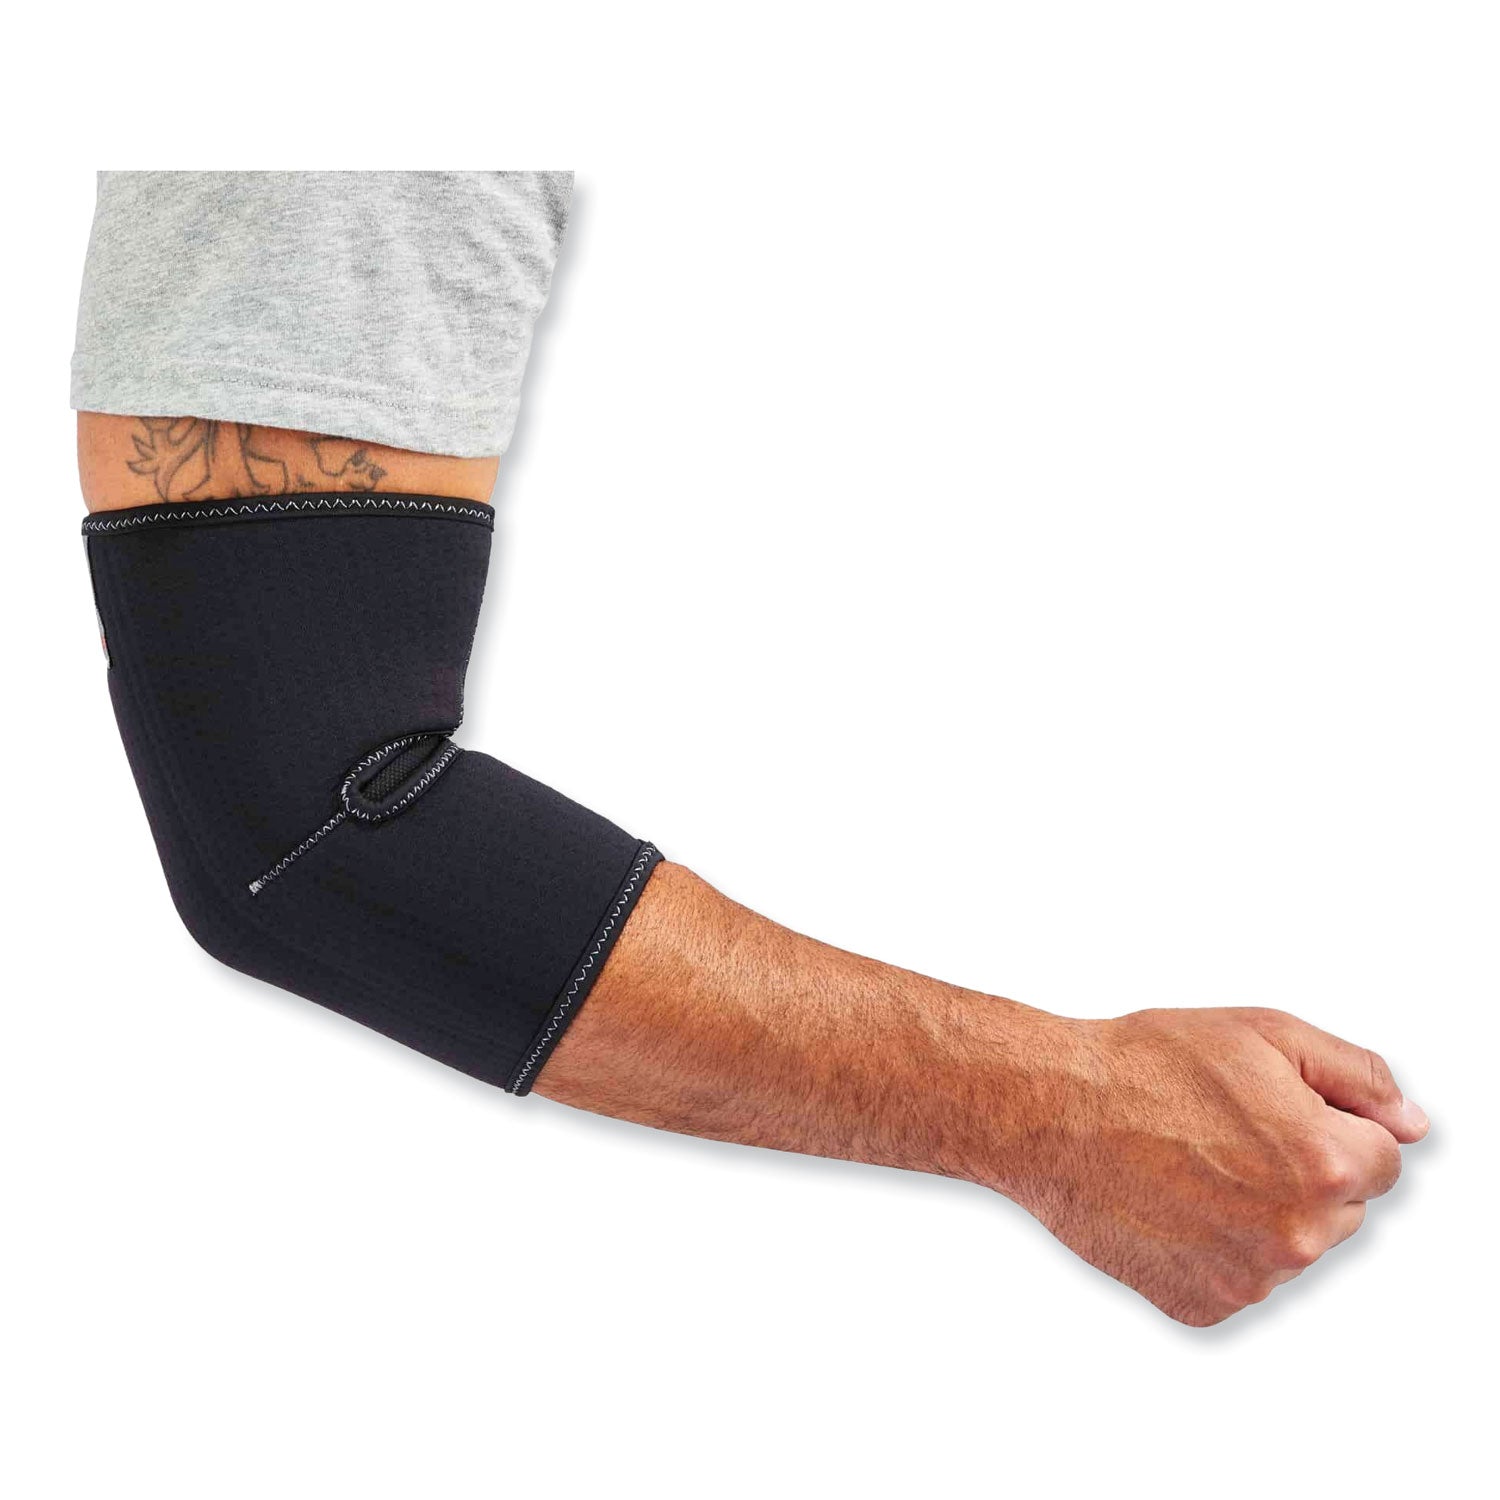 proflex-650-compression-arm-sleeve-small-black-ships-in-1-3-business-days_ego16572 - 4